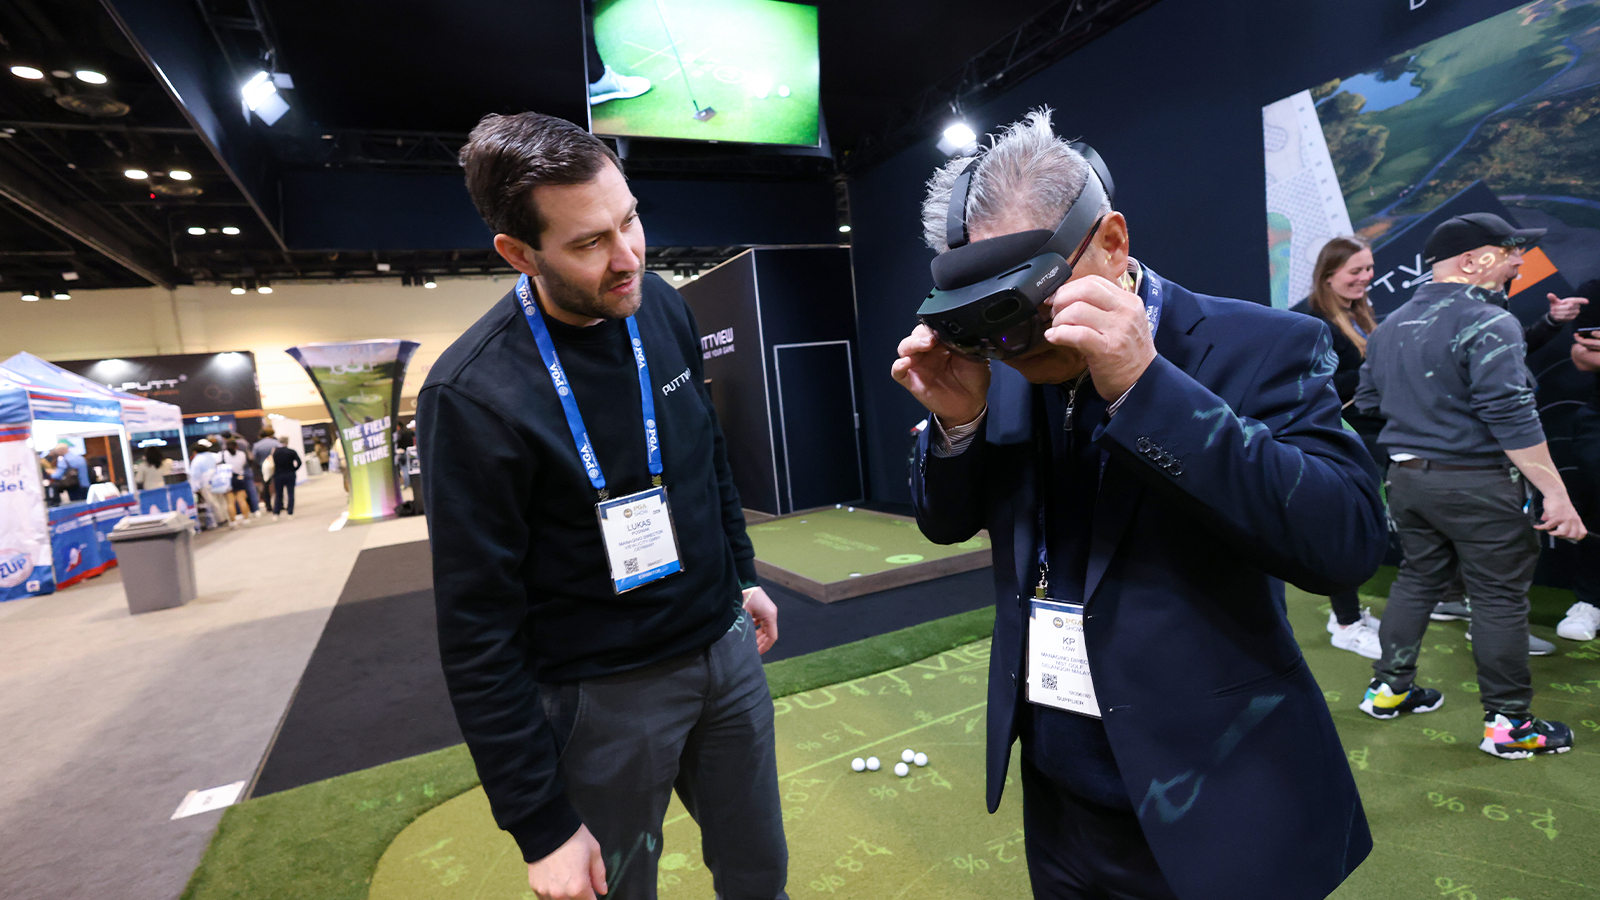 Attendees test Puttview technology during the 2023 PGA Show at Orange County Convention Center on Friday, January 27, 2023 in Orlando, Florida. (Photo by Scott Halleran/PGA of America)